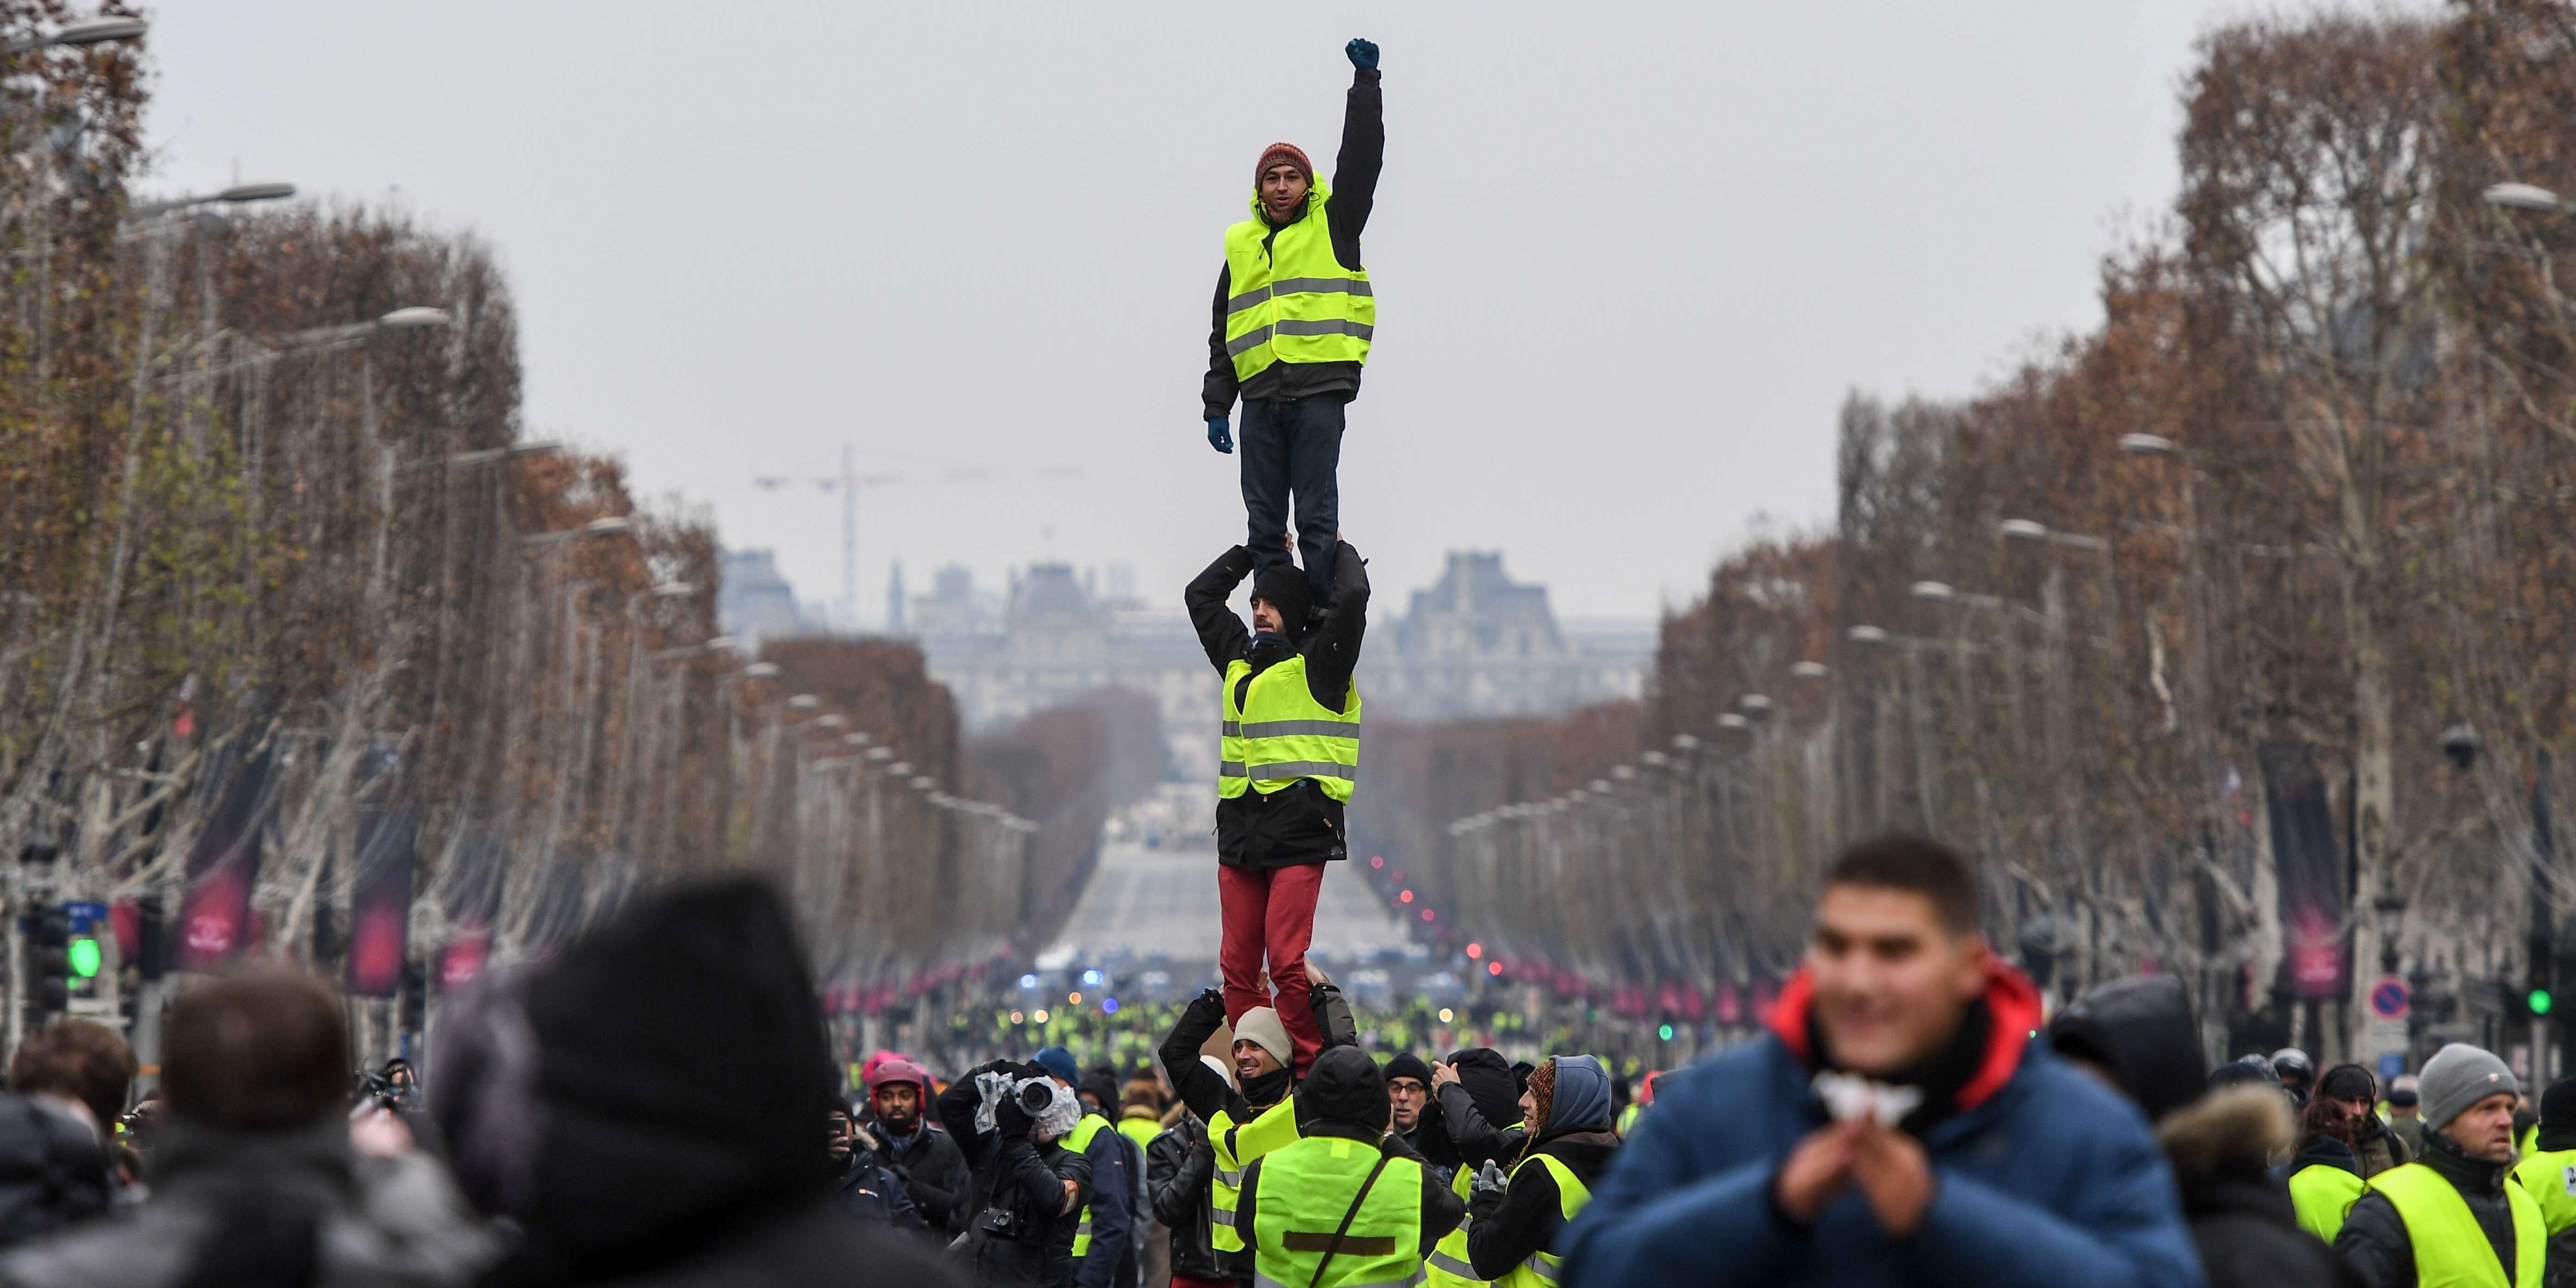 Protesters wearing yellow vests (gilets jaunes) do a human pyramide as they demonstrate against rising costs of living they blame on high taxes in Paris, on December 15, 2018. The "Yellow Vests" (Gilets Jaunes) movement in France originally started as a protest about planned fuel hikes but has morphed into a mass protest against President's policies and top-down style of governing. / AFP / Christophe ARCHAMBAULT